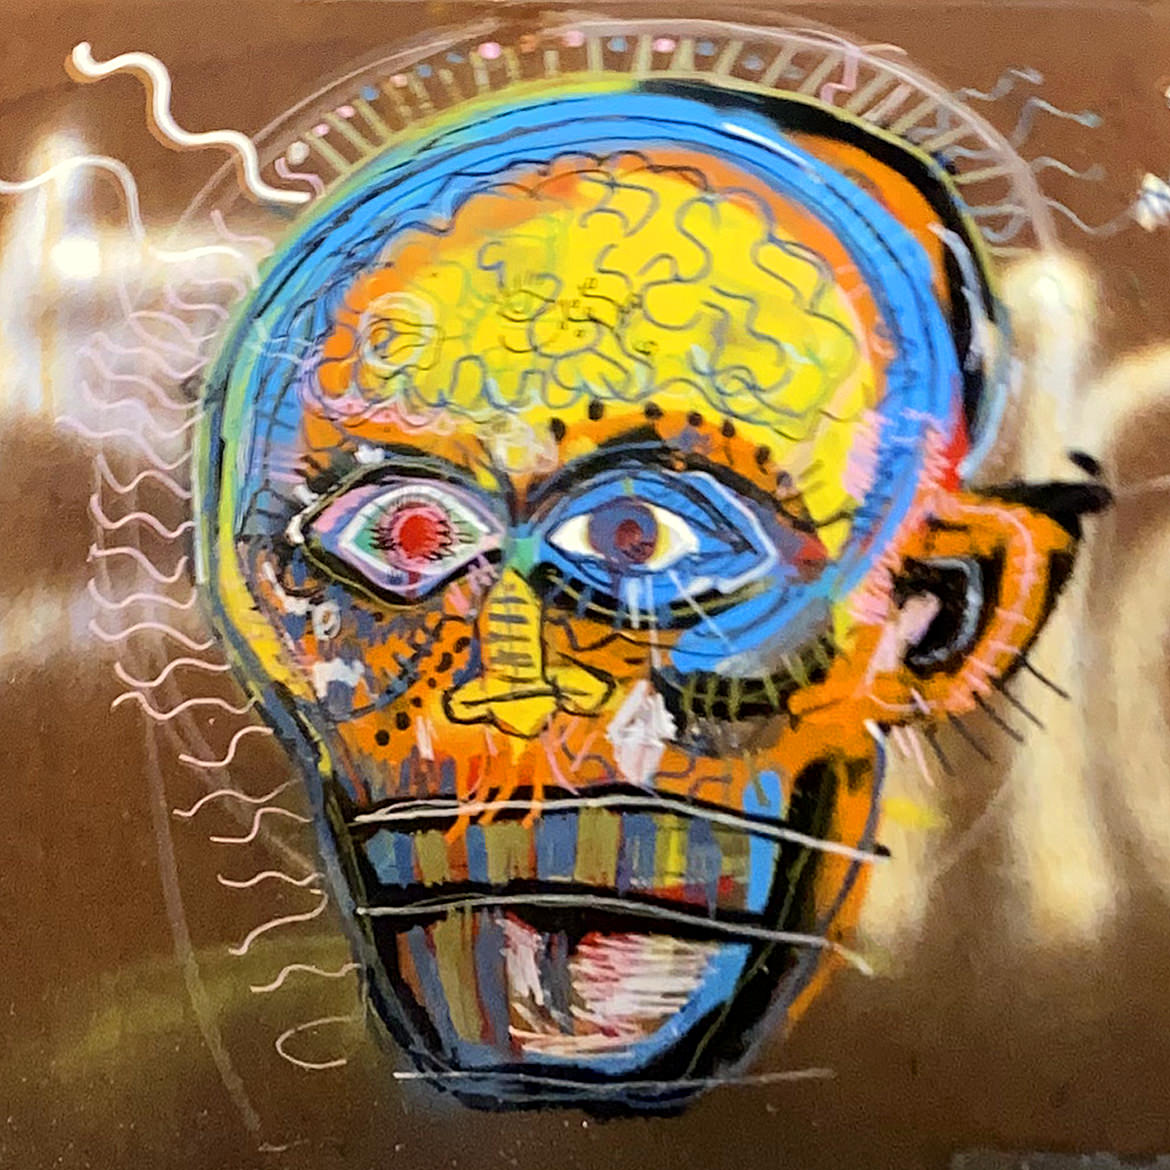 Street art graffiti of a colorful hand drawn person with their yellow brain showing through their skull. The style is very rough with loose brush strokes and overlayed line work.